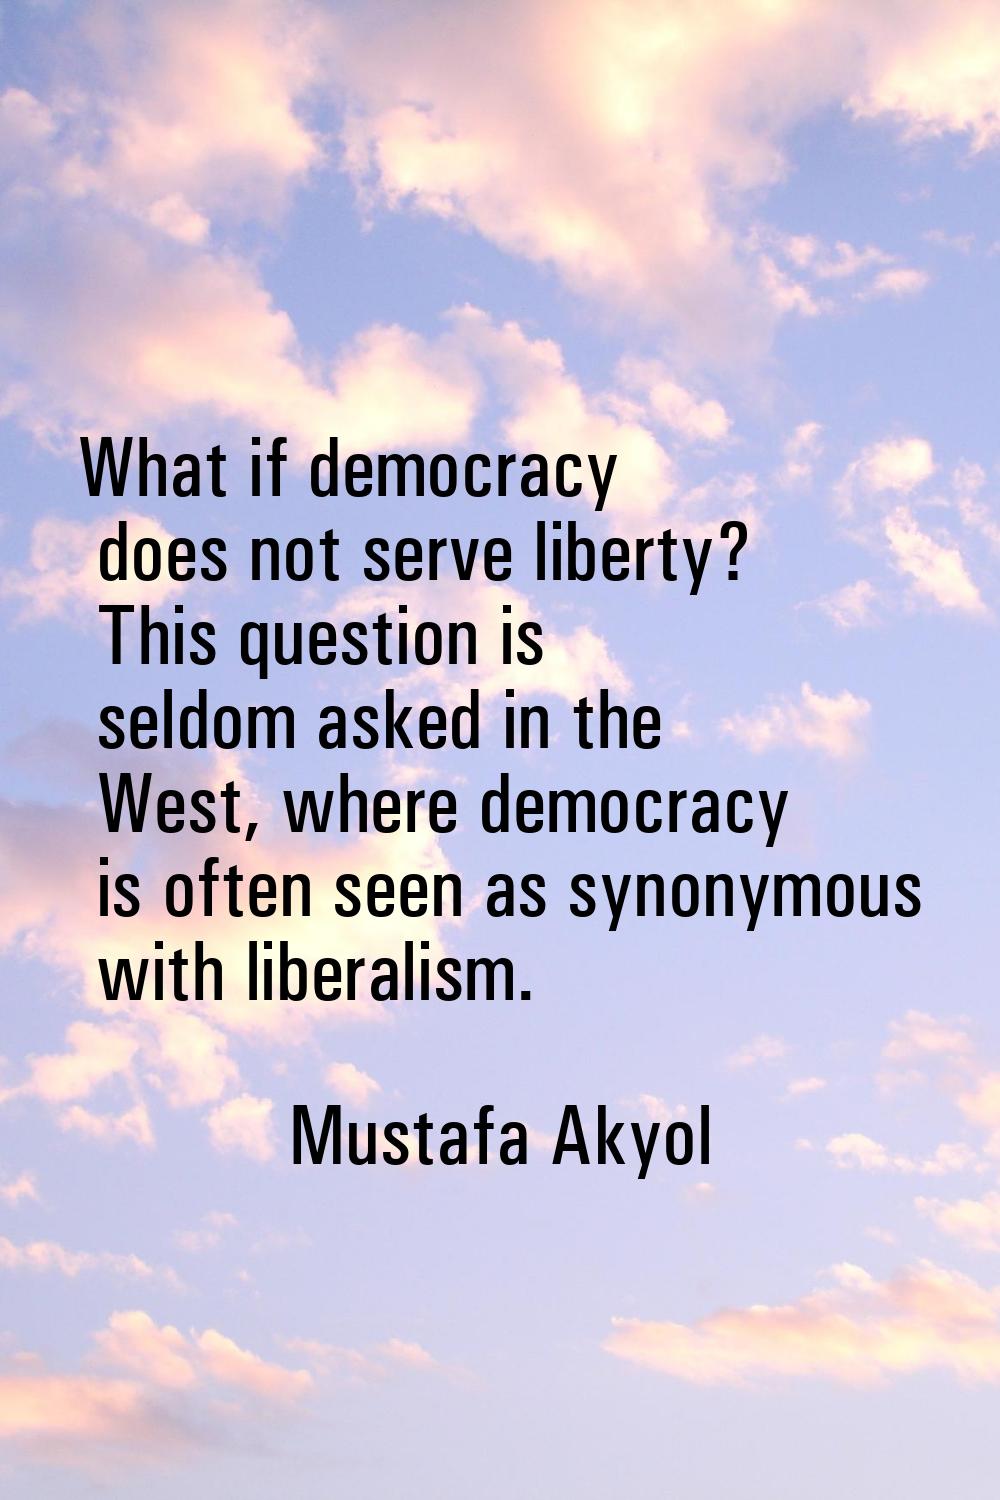 What if democracy does not serve liberty? This question is seldom asked in the West, where democrac